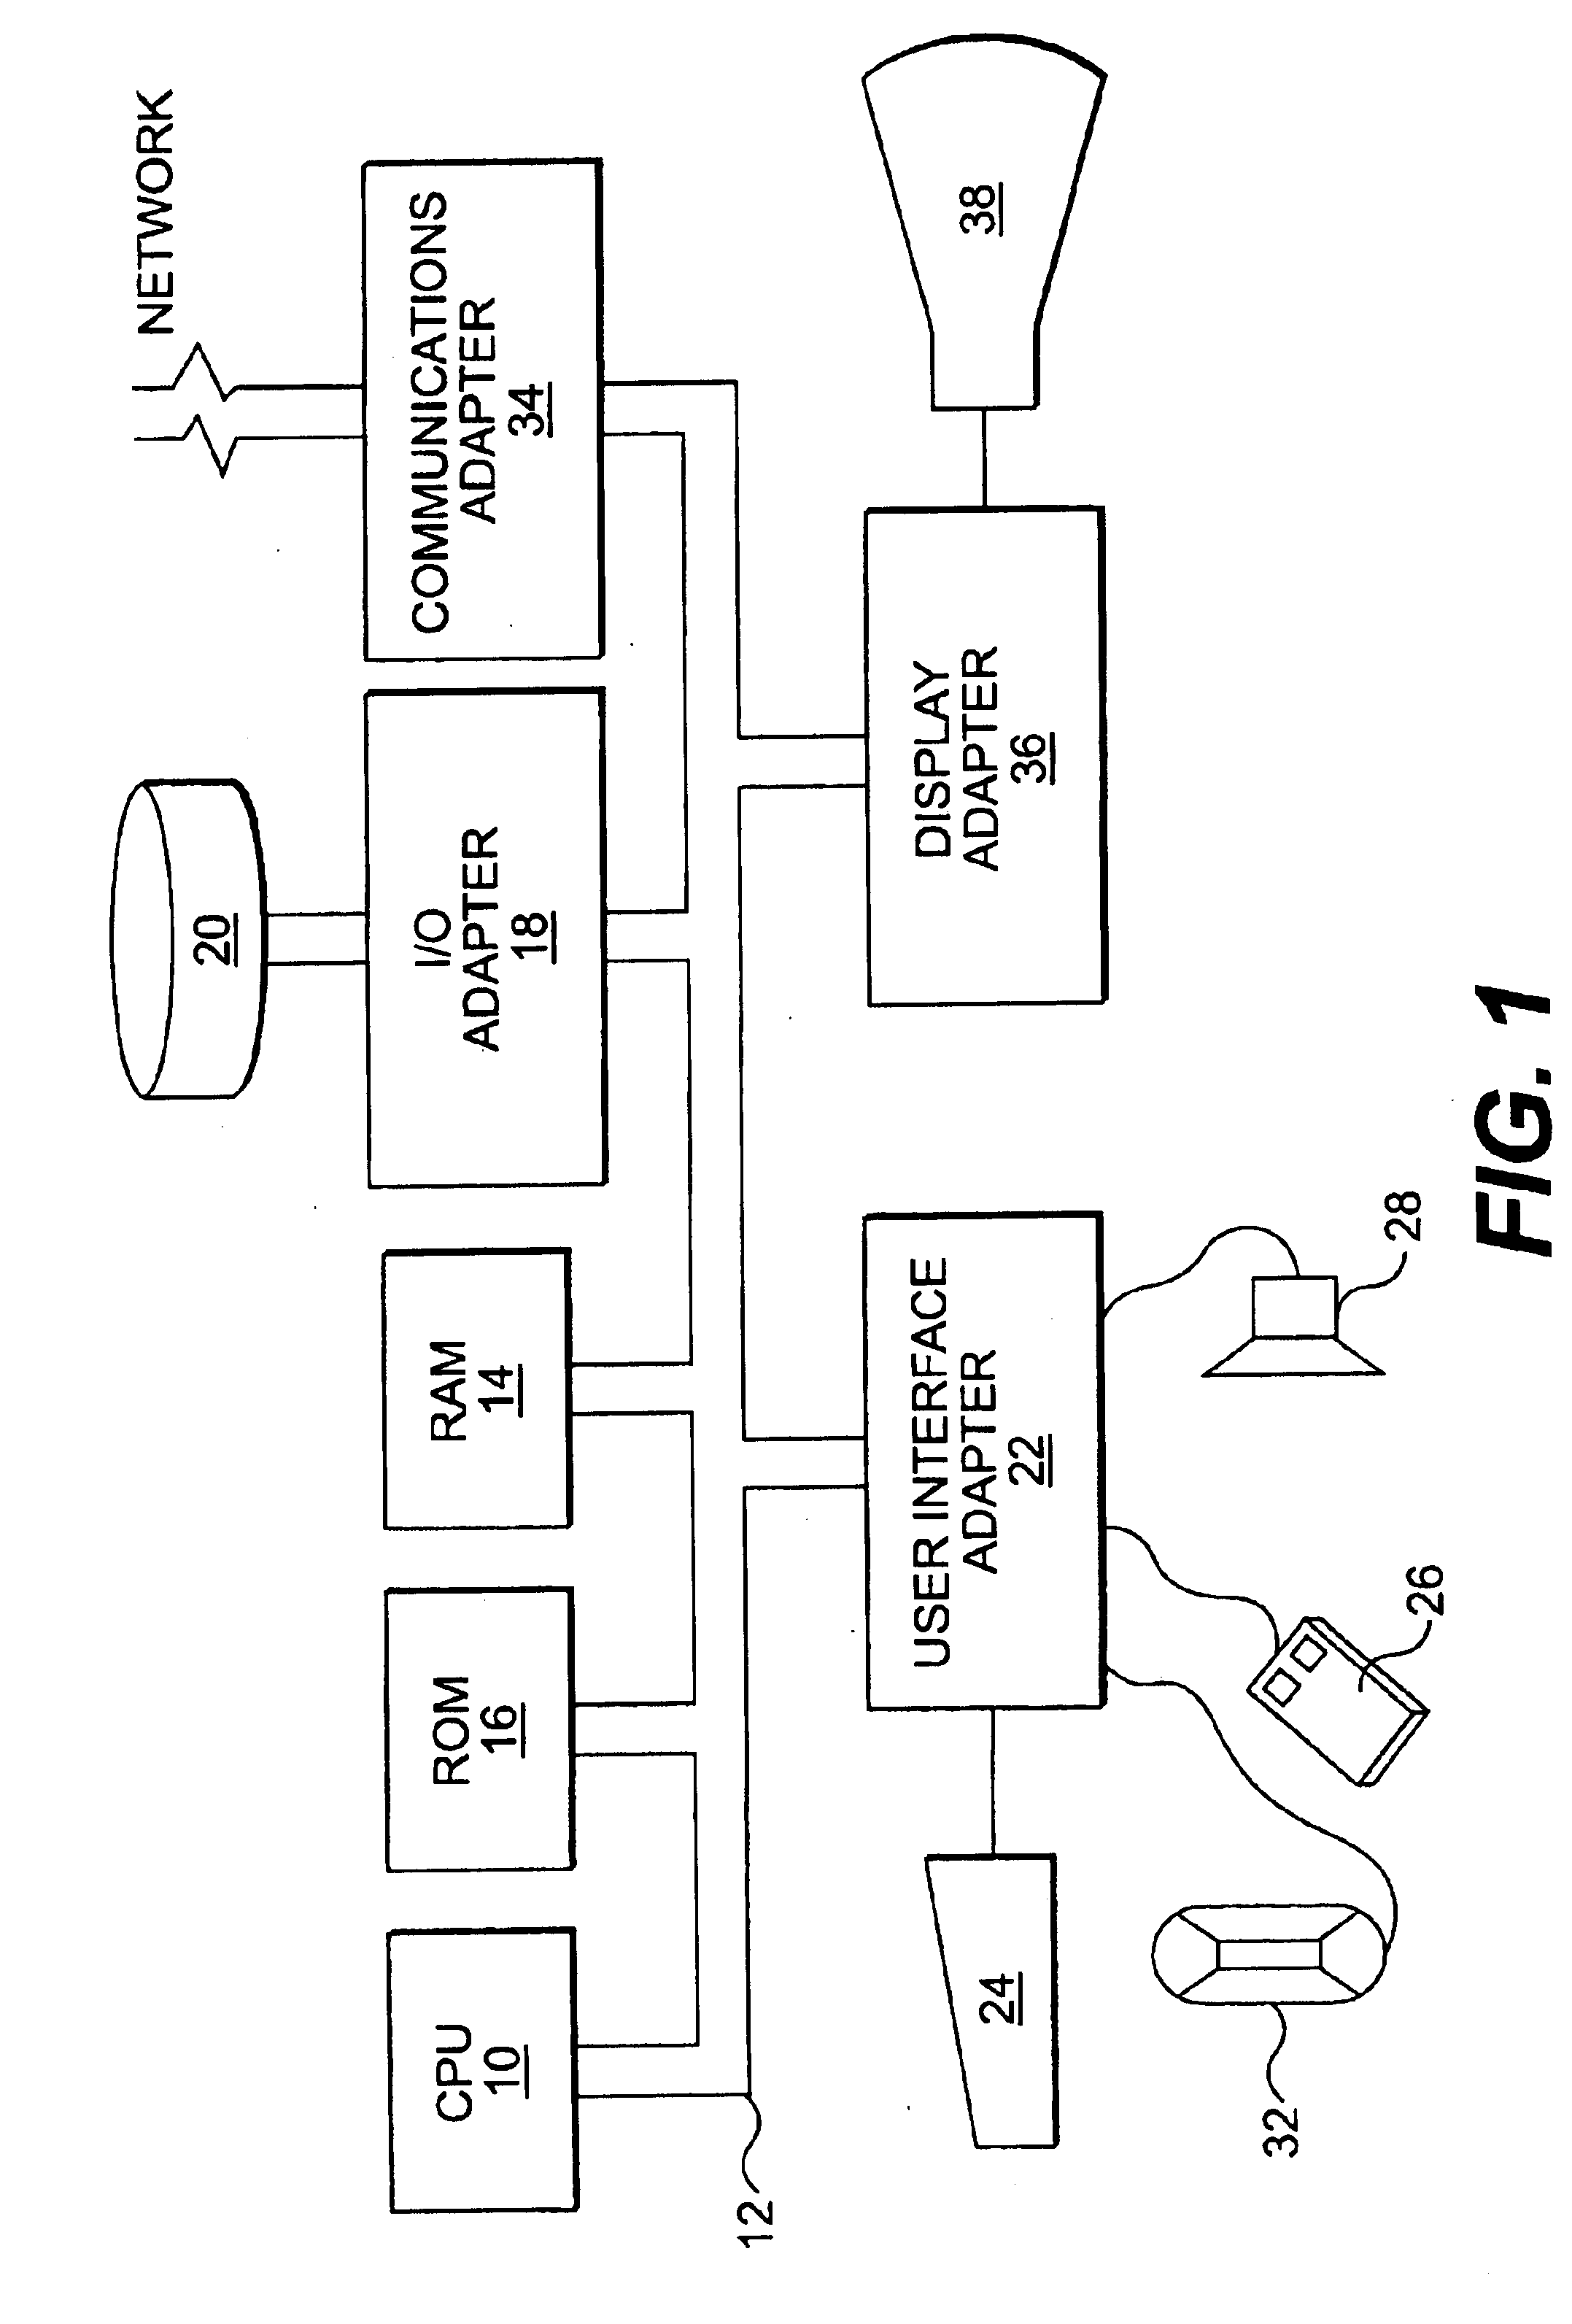 Automated hierarchical parameterized ESD network design and checking system